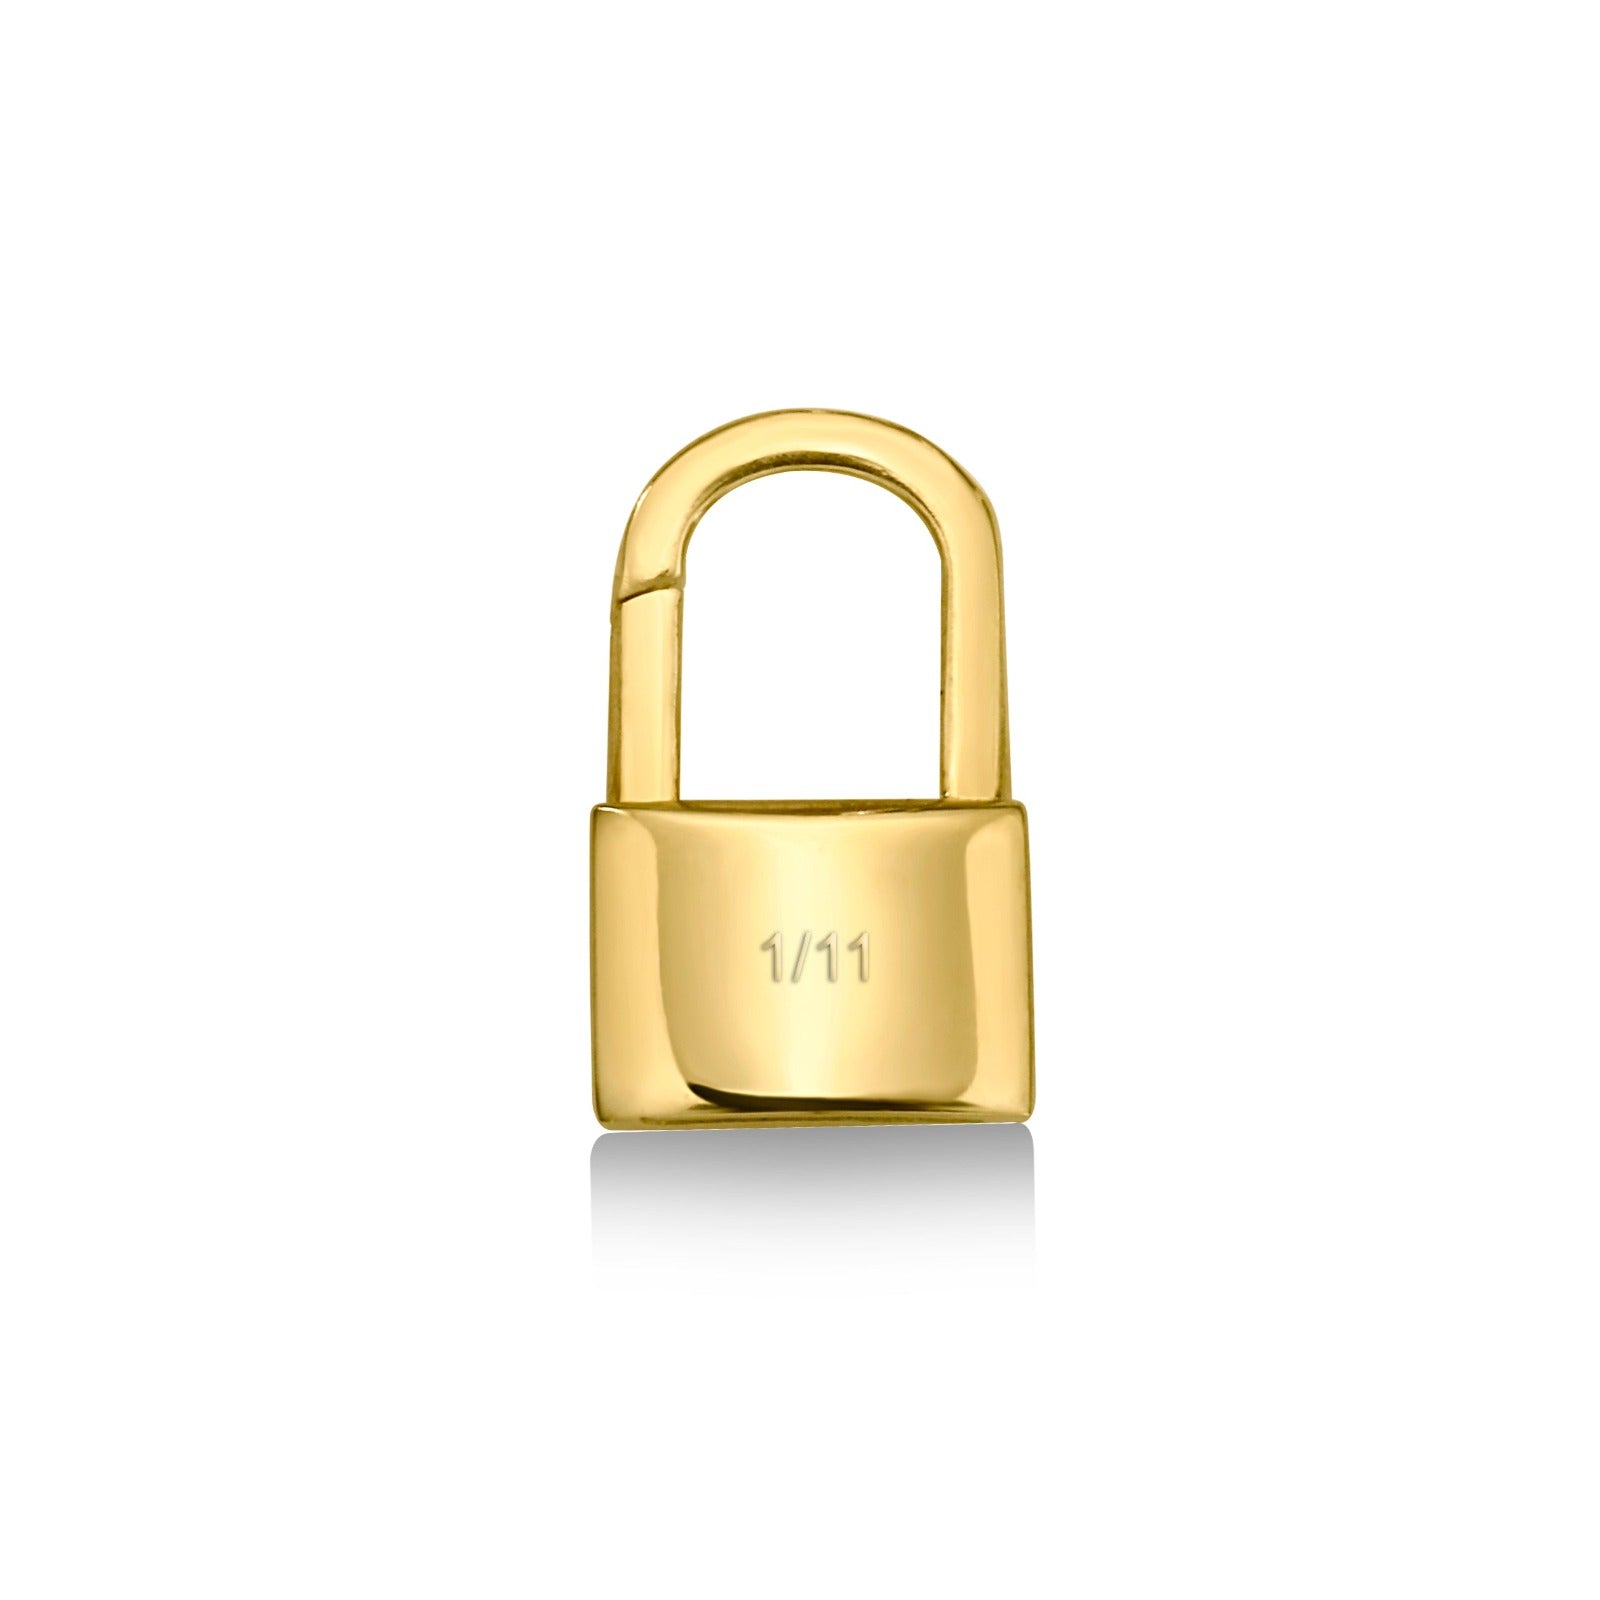 14k yellow gold padlock charm with 1/11 engraved.